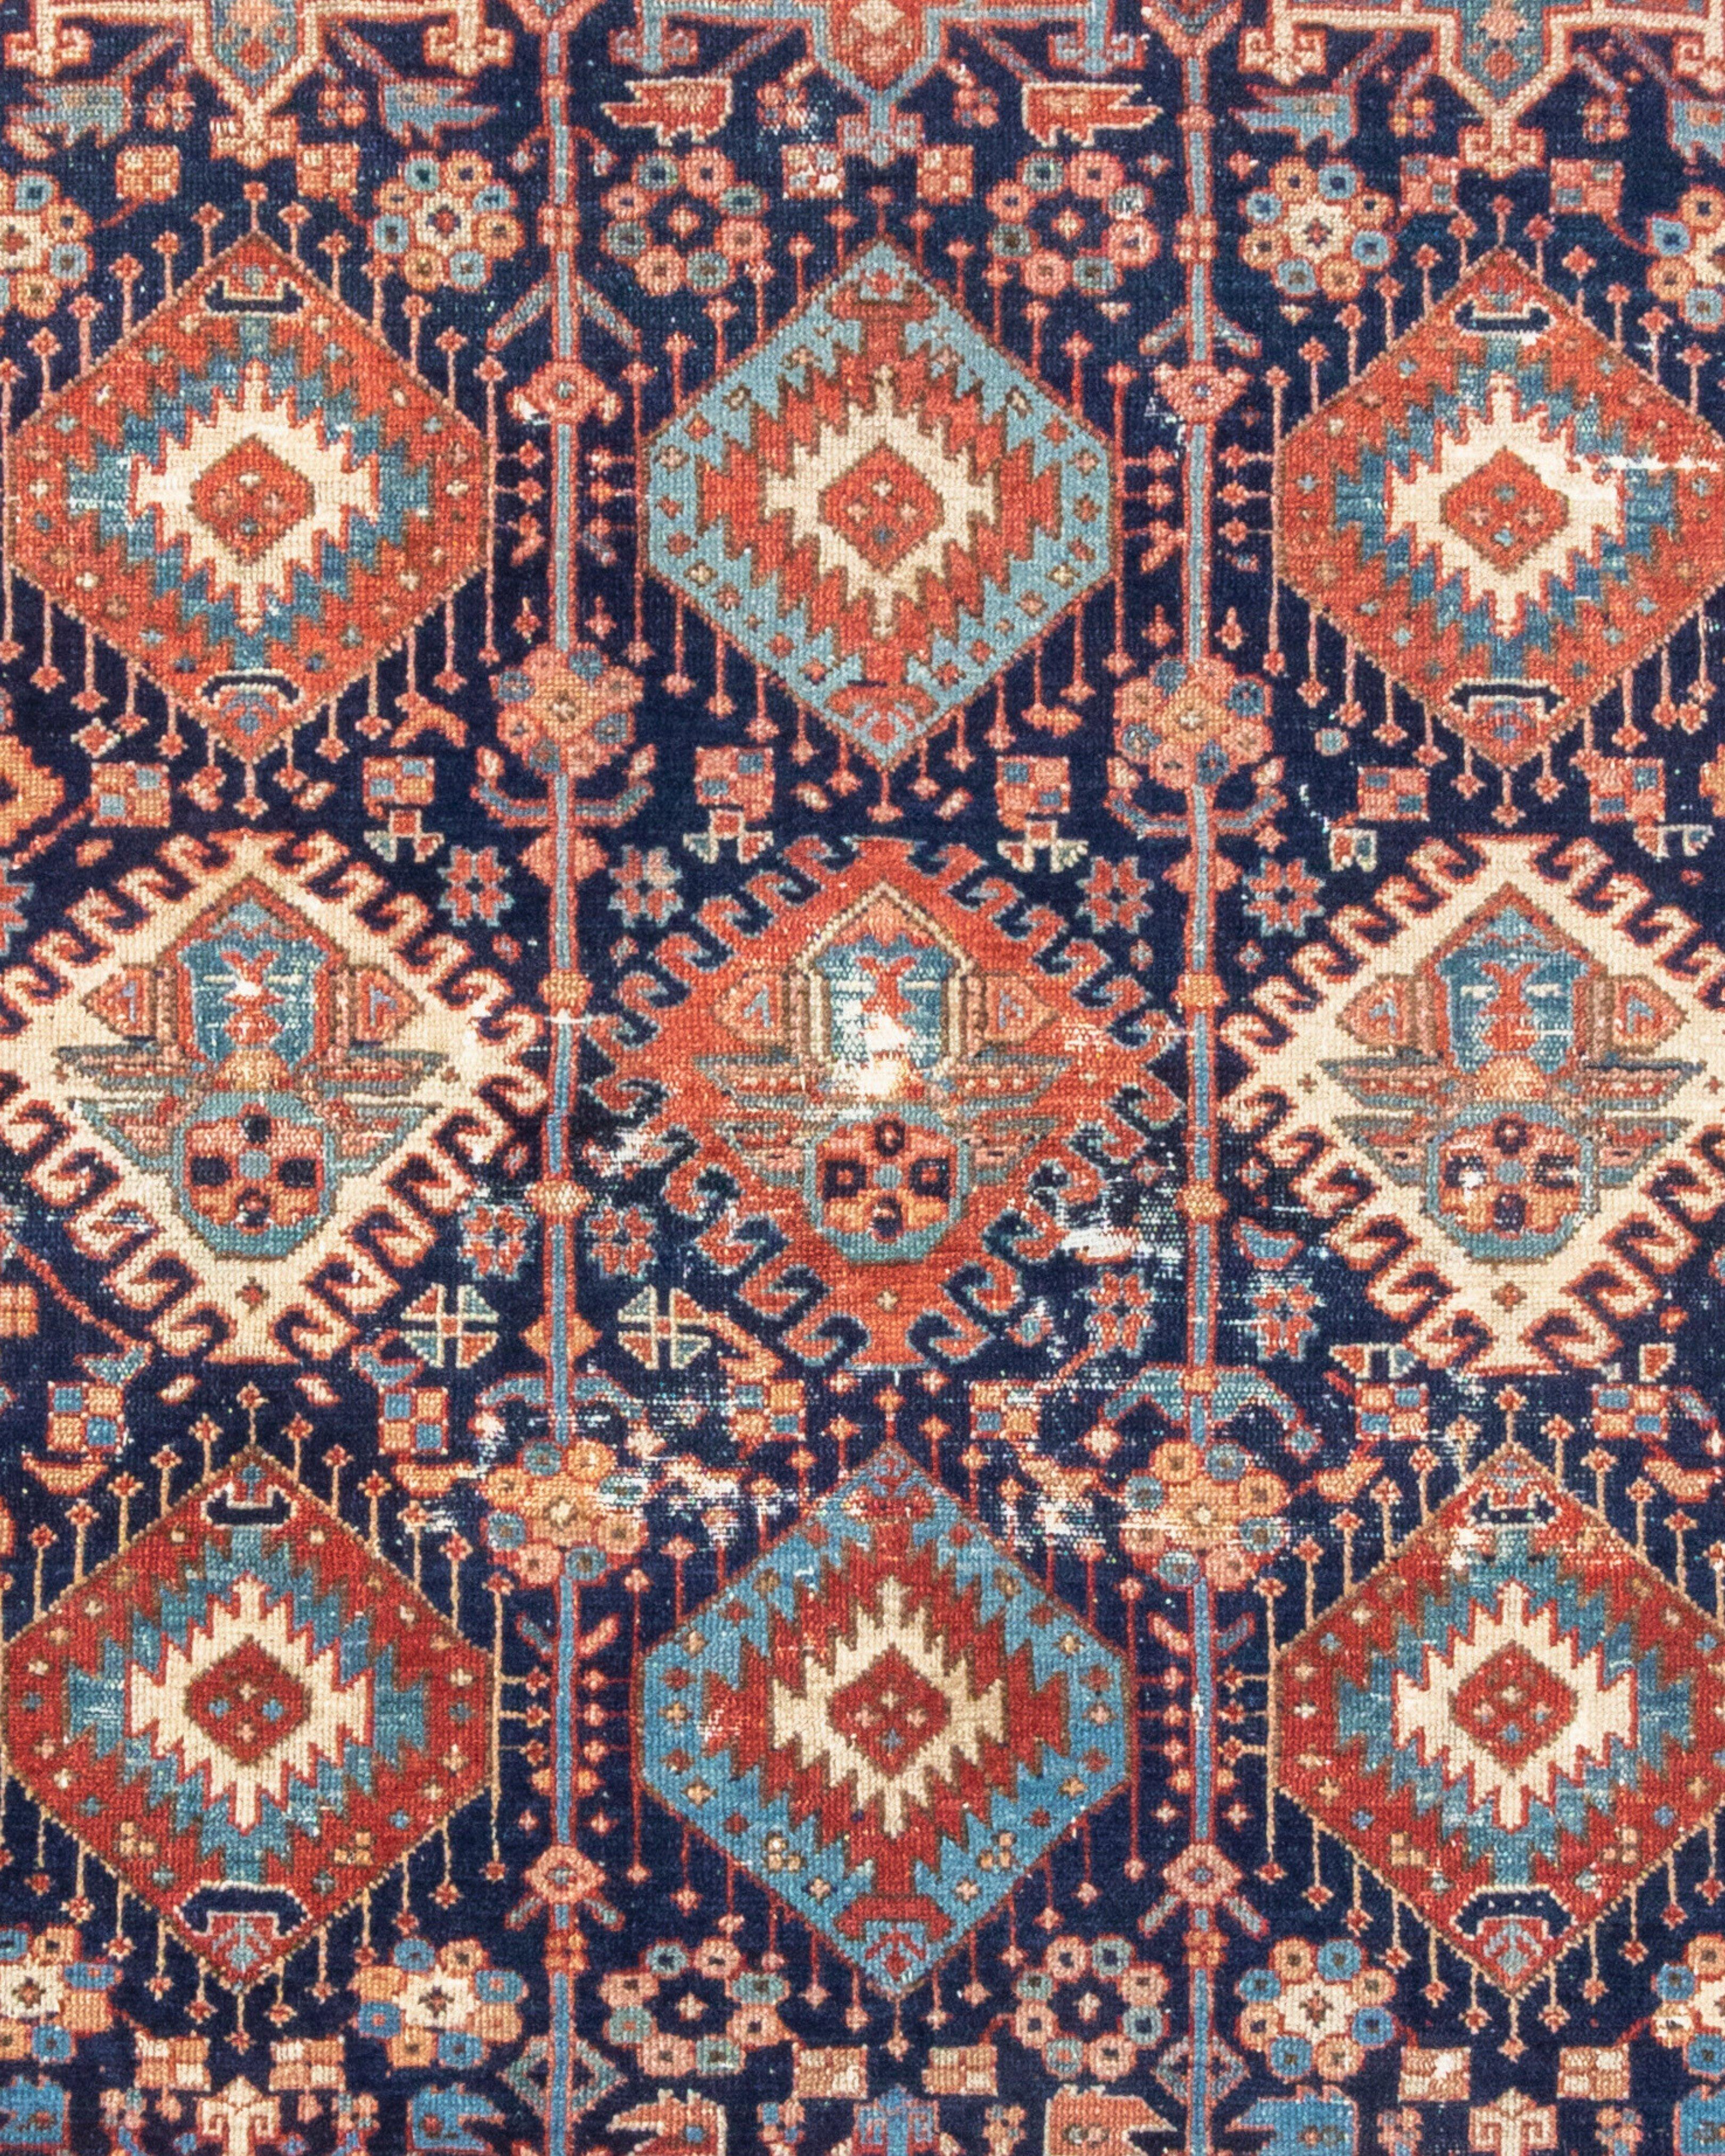 Antique Persian Karaja Rug, c. 1900

Being sold on behalf of Mr. and Mrs. Lenore Zaiser. Price includes restoration with the exception of reweaving the loss at the ends. Just a good securing of the ends.

Additional Information:
Dimensions: 5'10